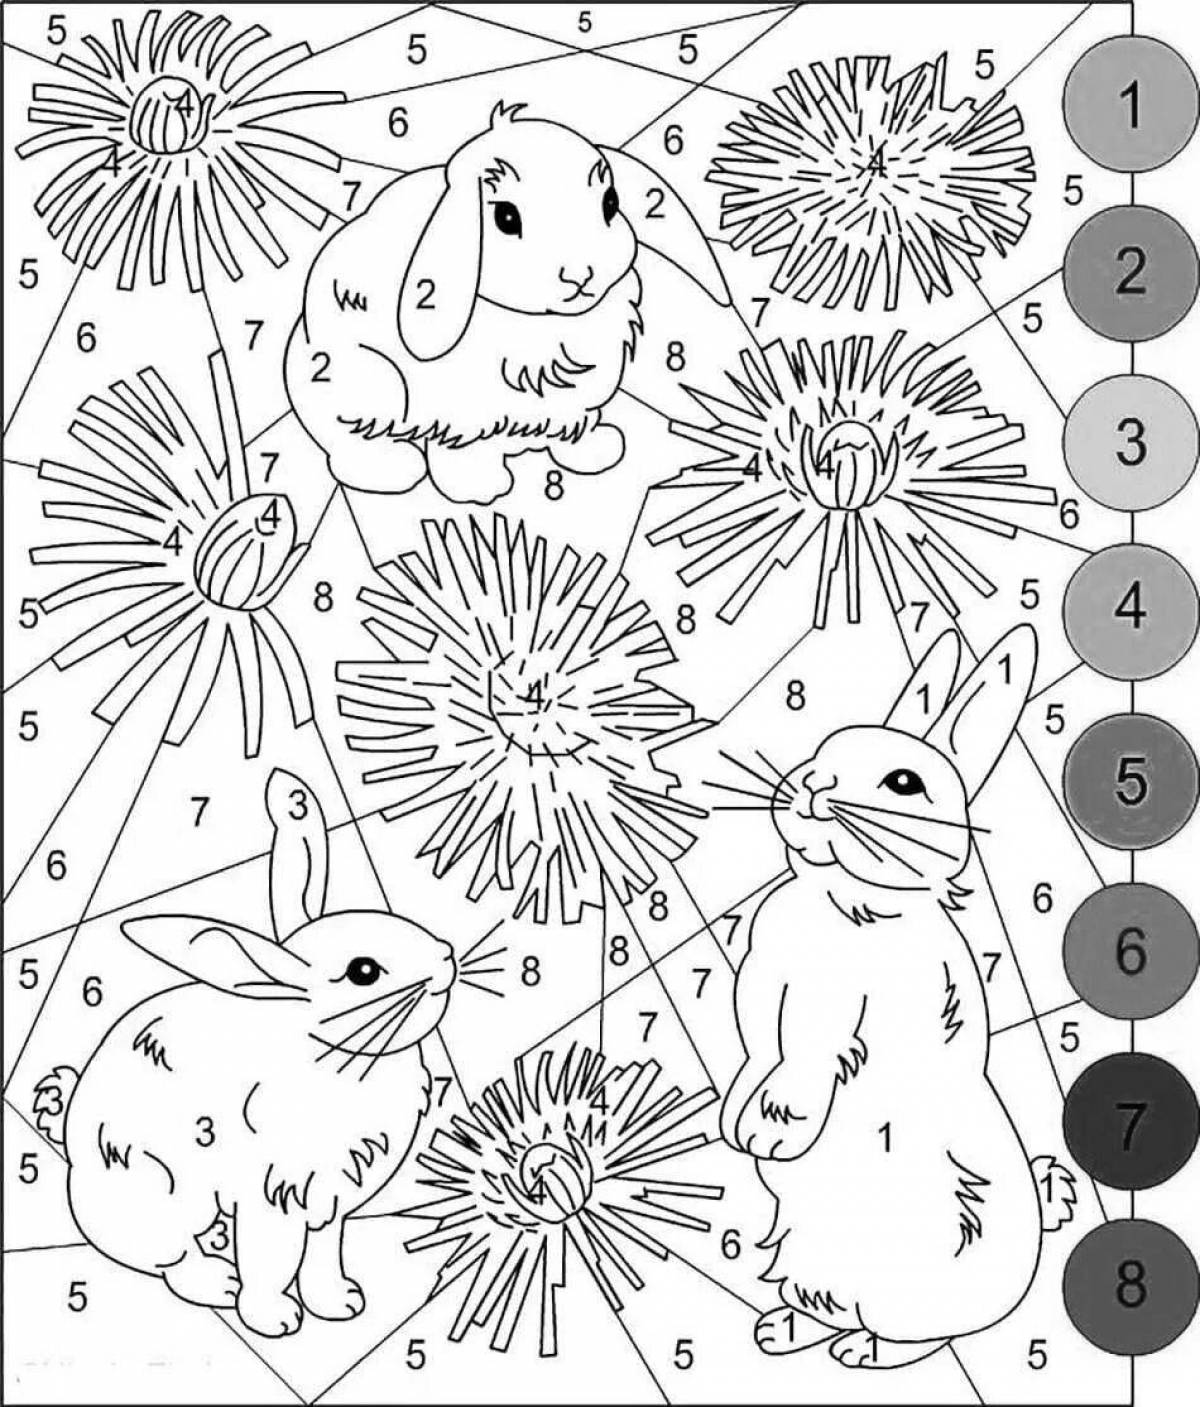 Fun number coloring page